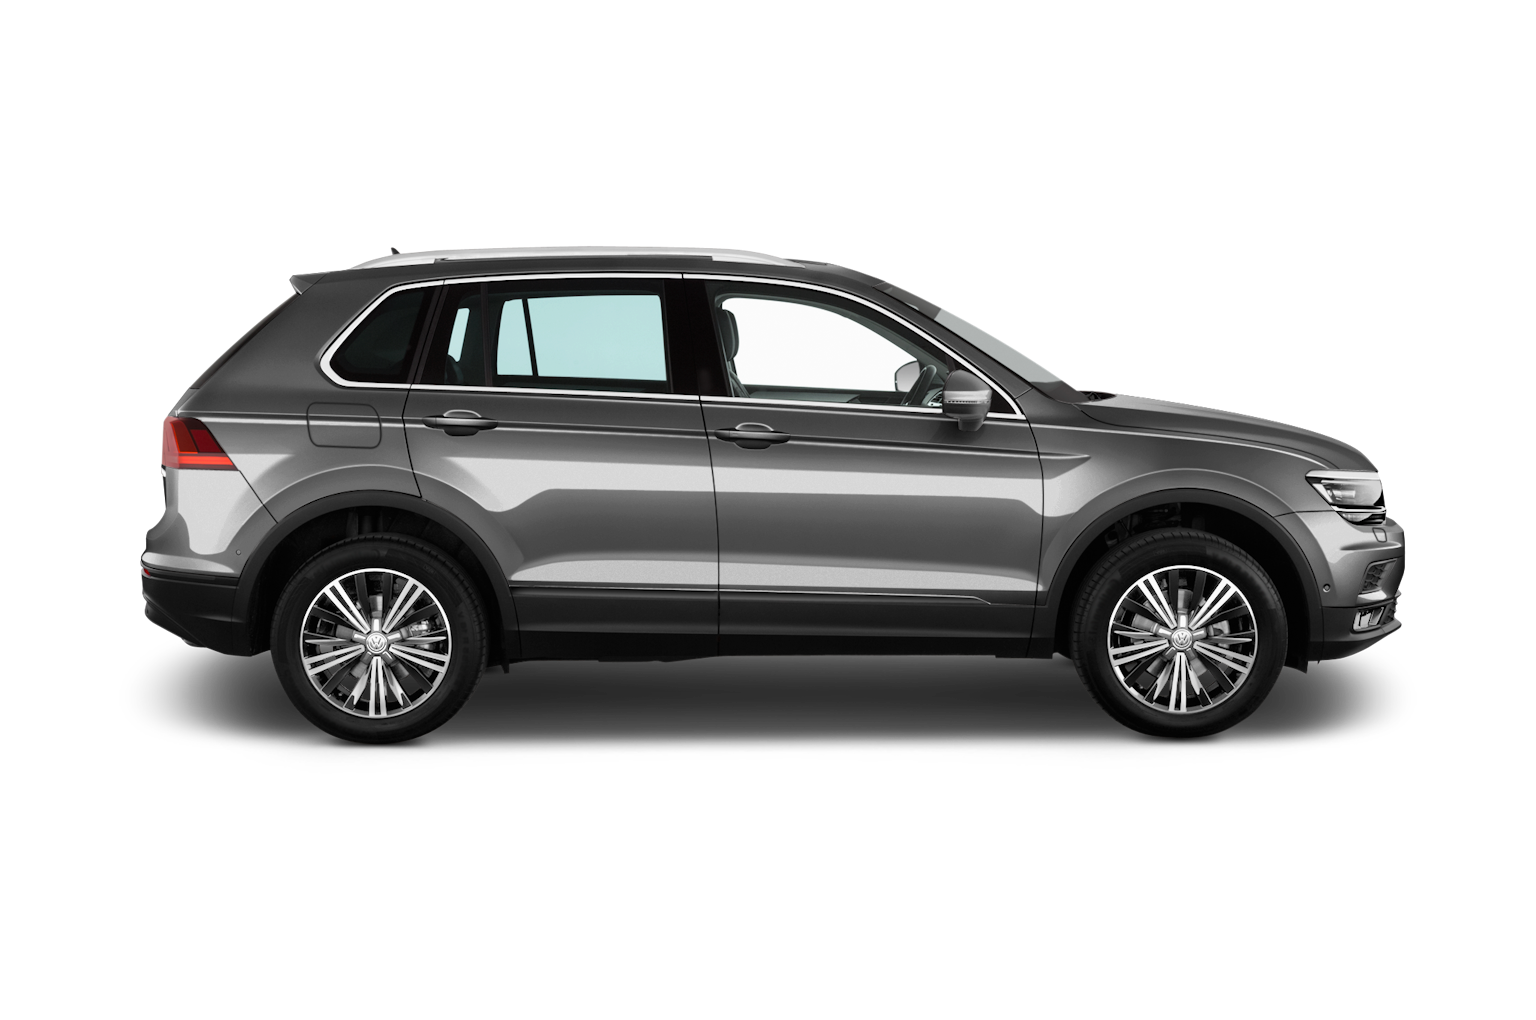 Volkswagen Tiguan Lease deals from £202pm carwow